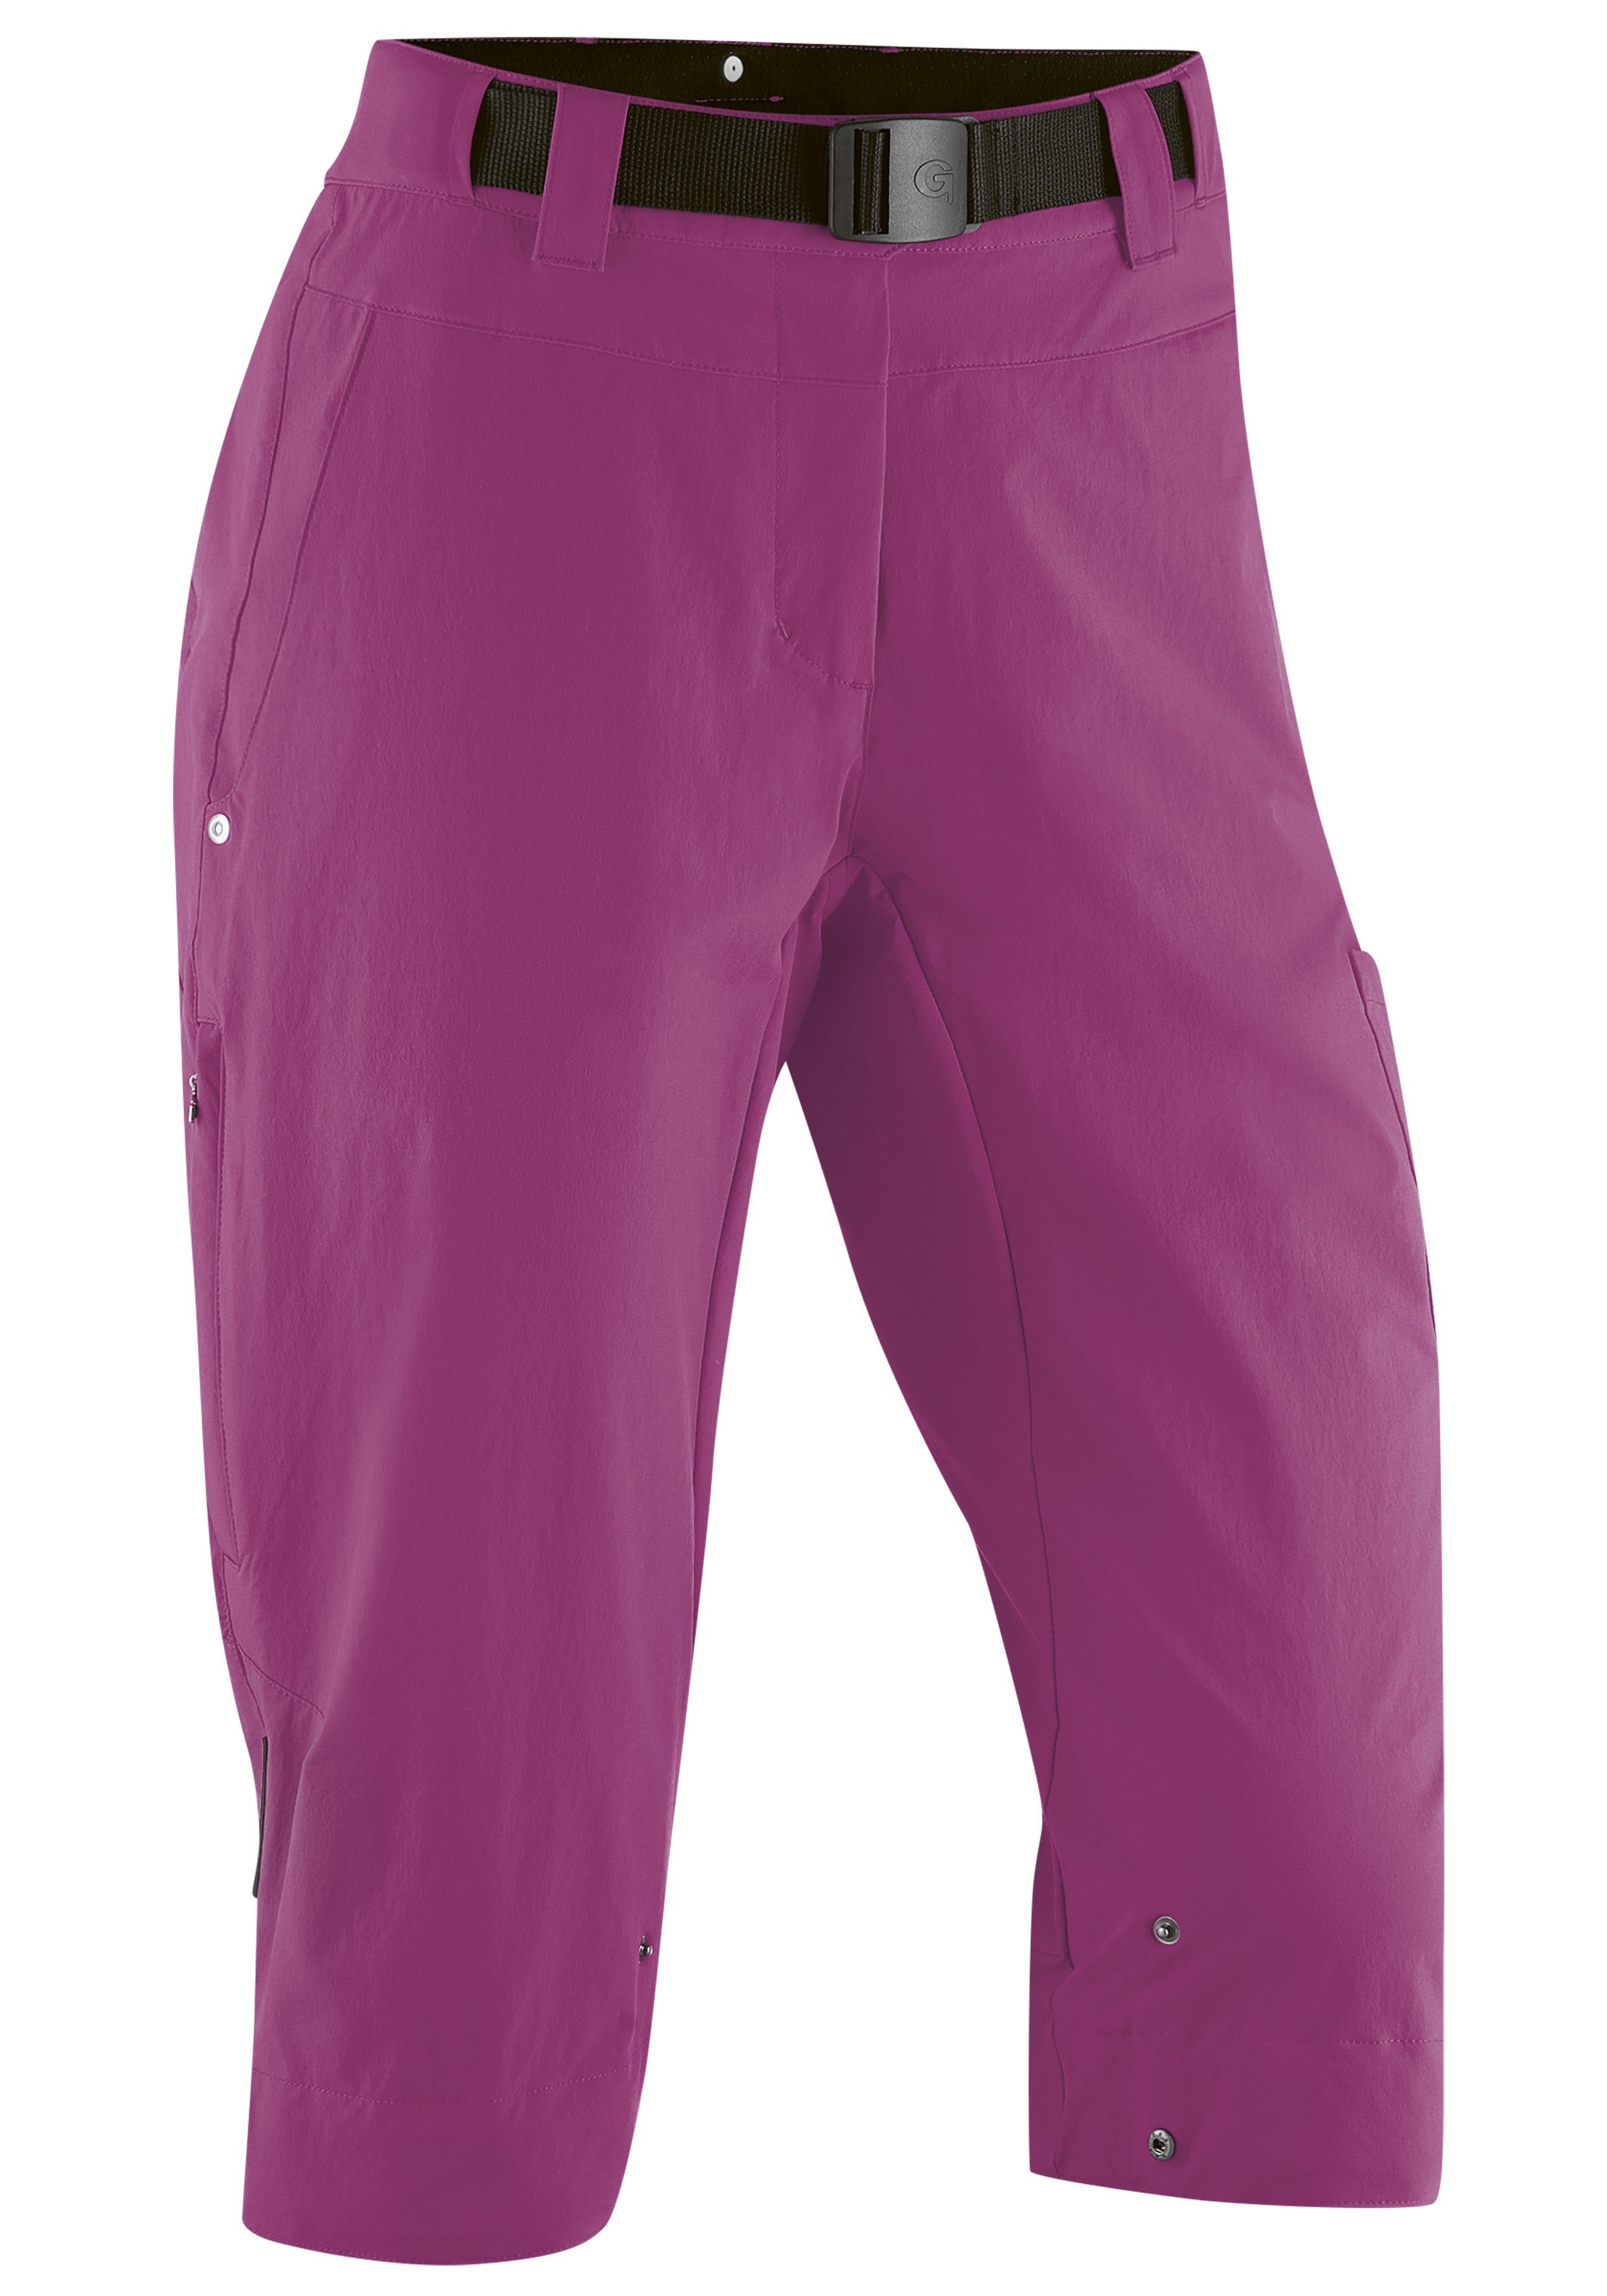 Bikehose Gonso Ruth 2-in-1-Shorts 3/4